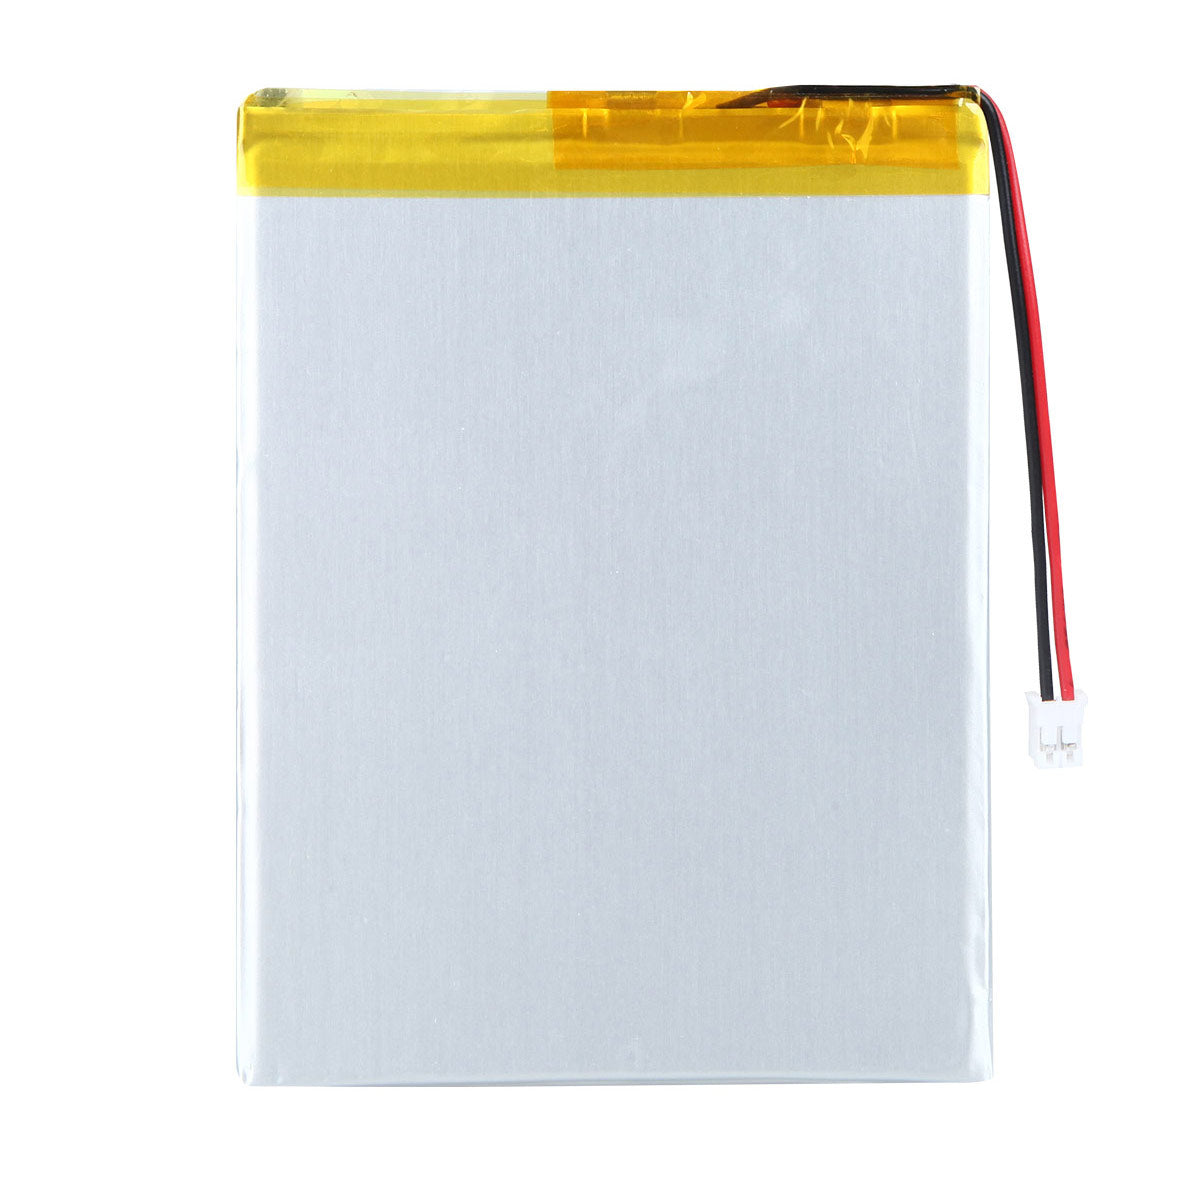 3.7V 3200mAh 367599 Rechargeable Polymer Lithium-Ion Battery